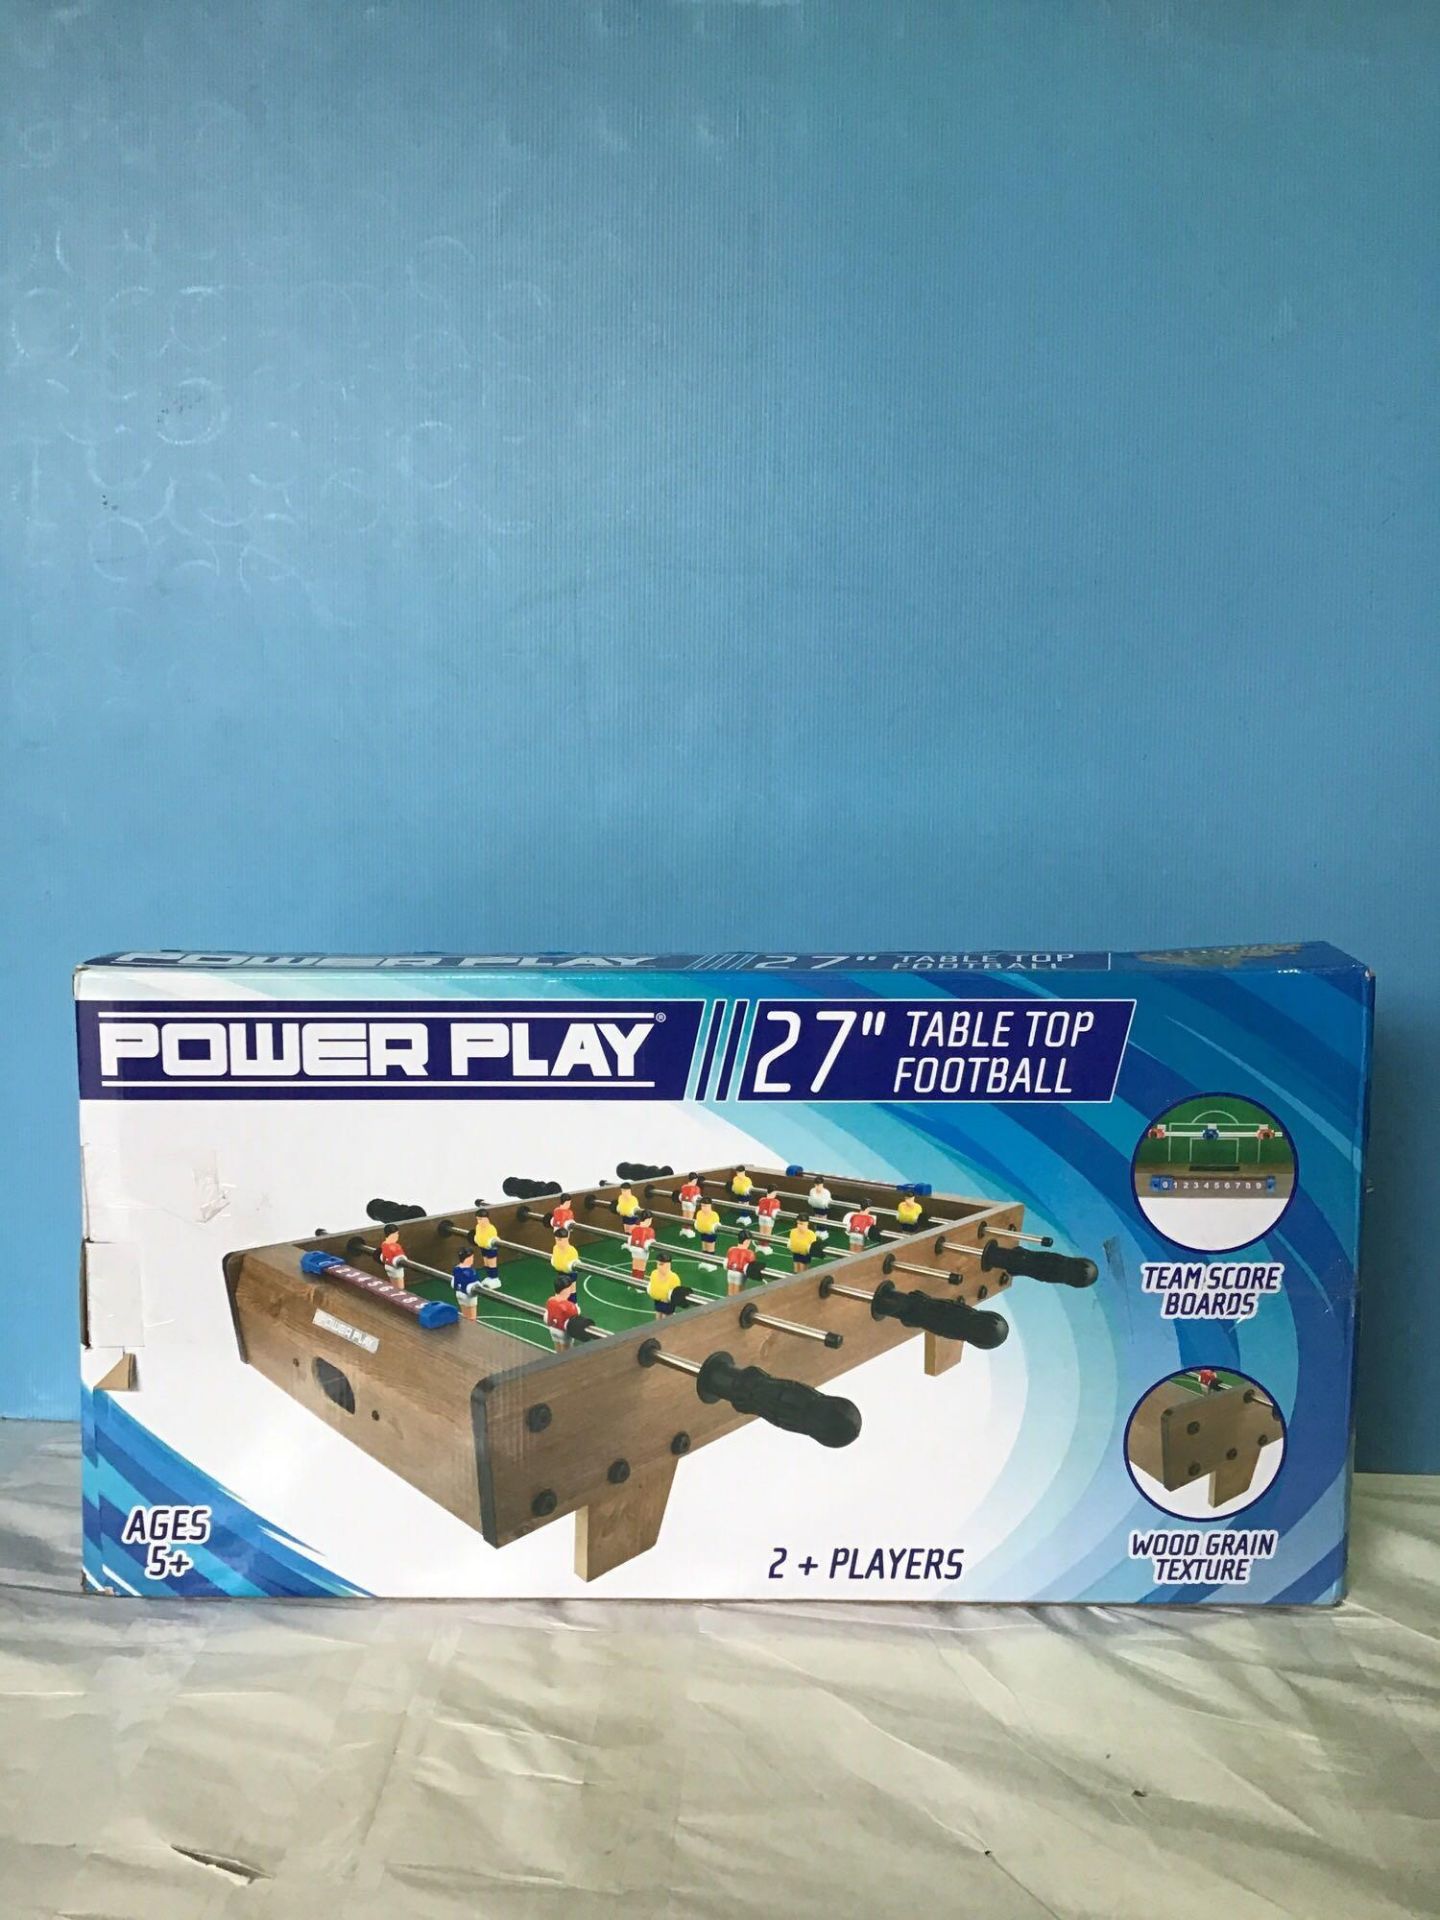 Power Play Table Top Football Game, 27 Inch - Image 2 of 5